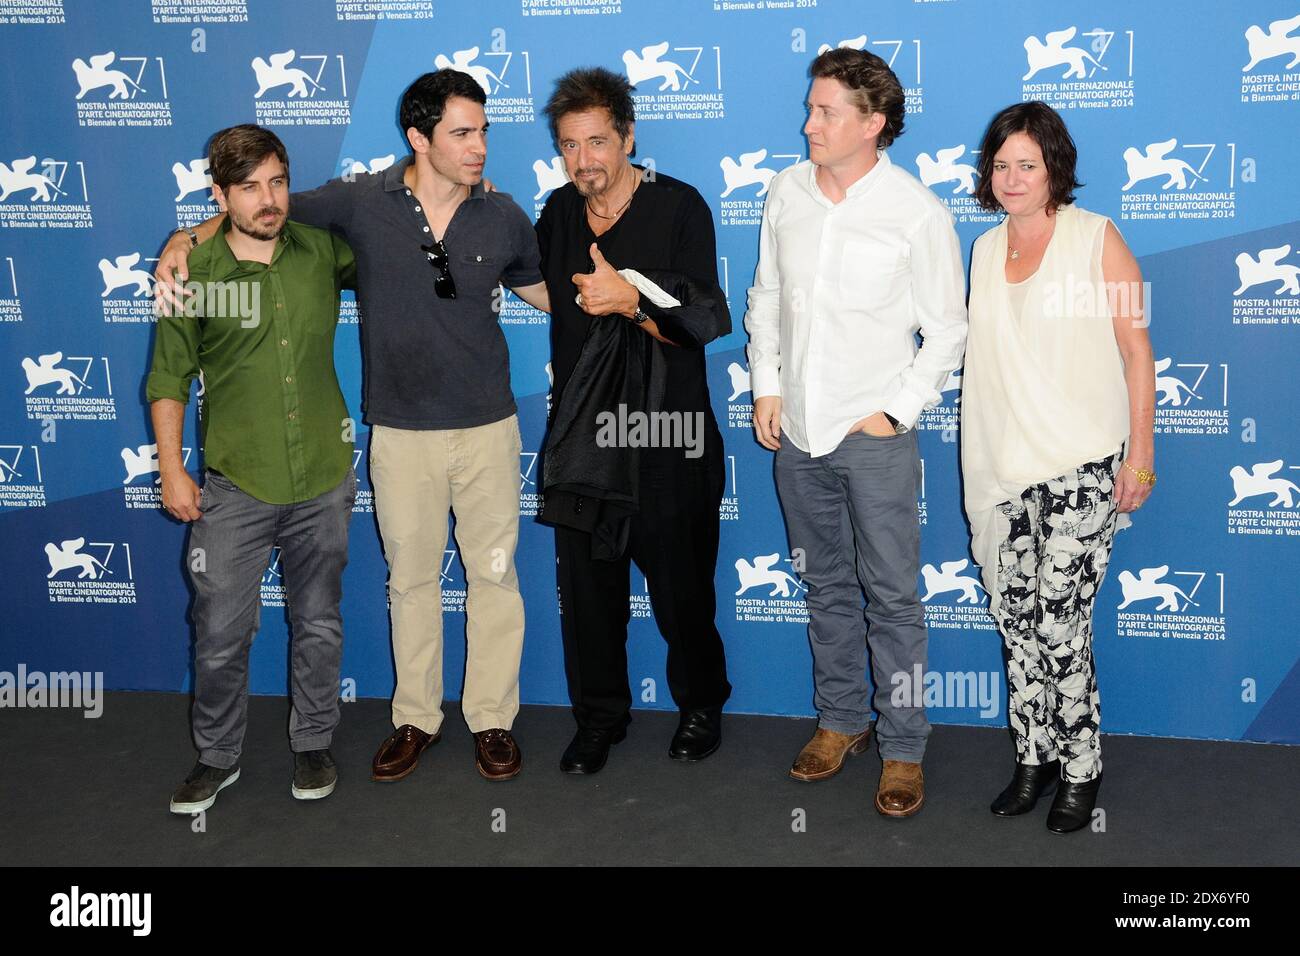 Paul Logan, Chris Messina, Al Pacino, David Gordon Green and Lisa Muskat attending the Manglehorn Photocall during the 71st International Venice Film Festival, on August 30, 2014 in Venice, Italy. Photo by Aurore Marechal/ABACAPRESS.COM Stock Photo